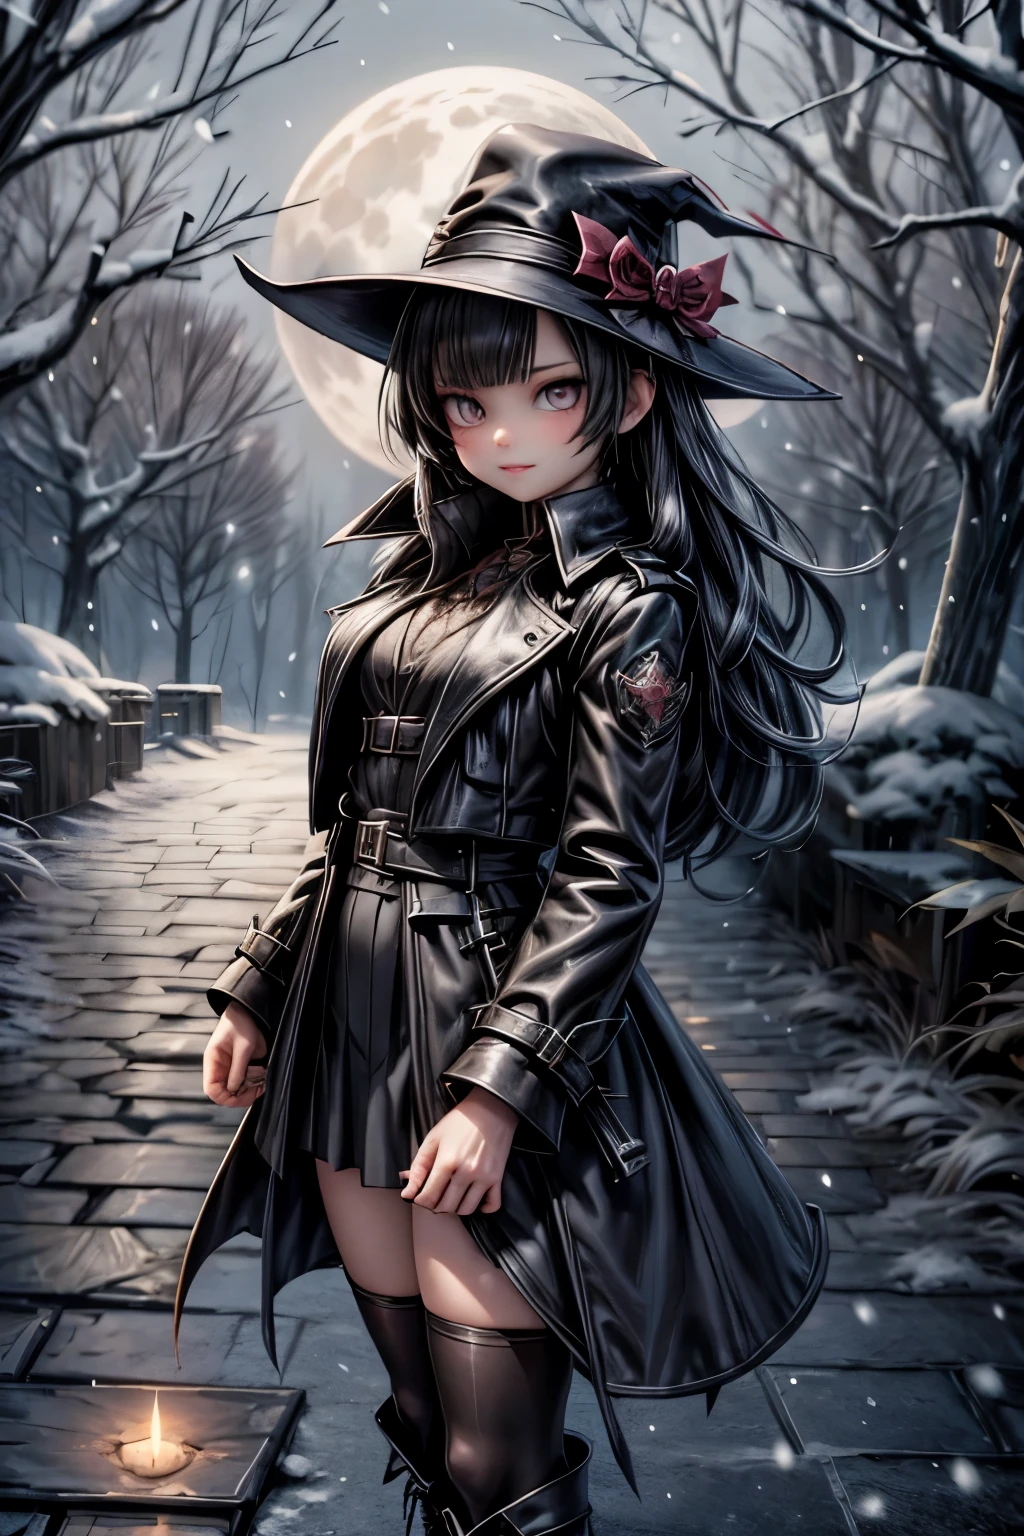 a vampire hunter girl wearing a Black Trench Coat and skirt, tighhighs, (looking a compass), icy woods at night, snowing at night, castlevania art style, moon, lanterns and candles floating all around the path